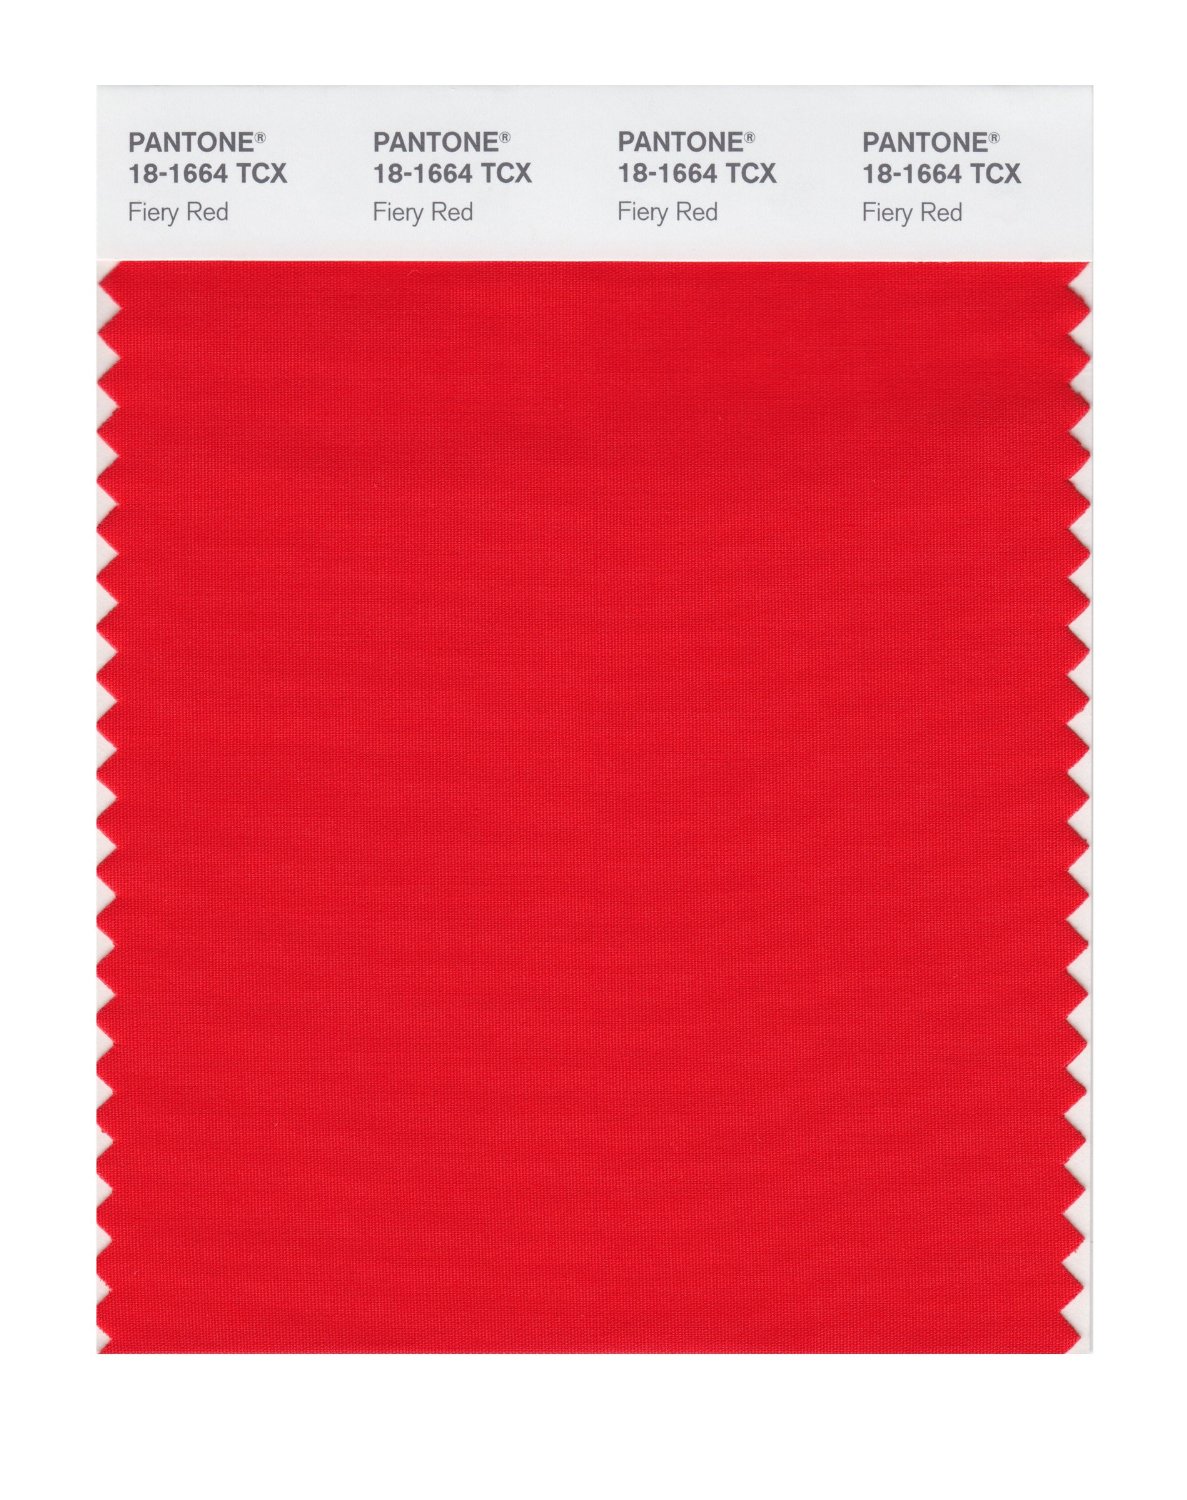 Pantone Cotton Swatch 18-1664 Fiery Red